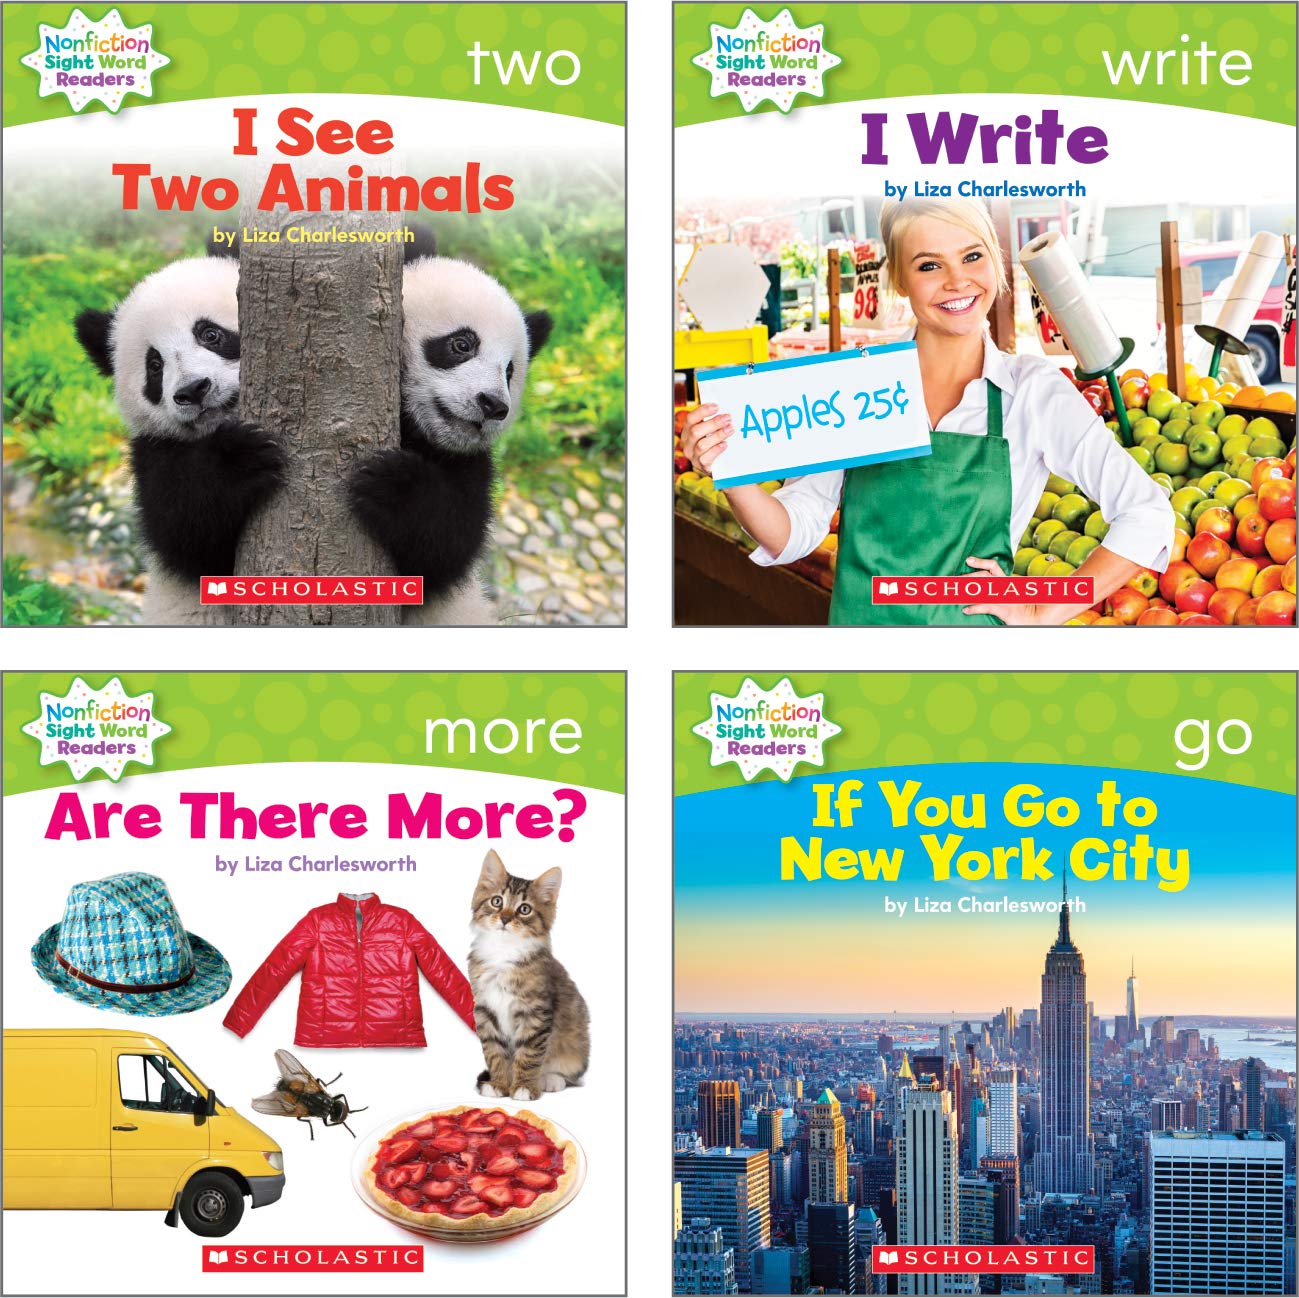 Nonfiction Sight Word Readers: Guided Reading Level C (Parent Pack): Teaches 25 Key Sight Words to Help Your Child Soar as a Reader